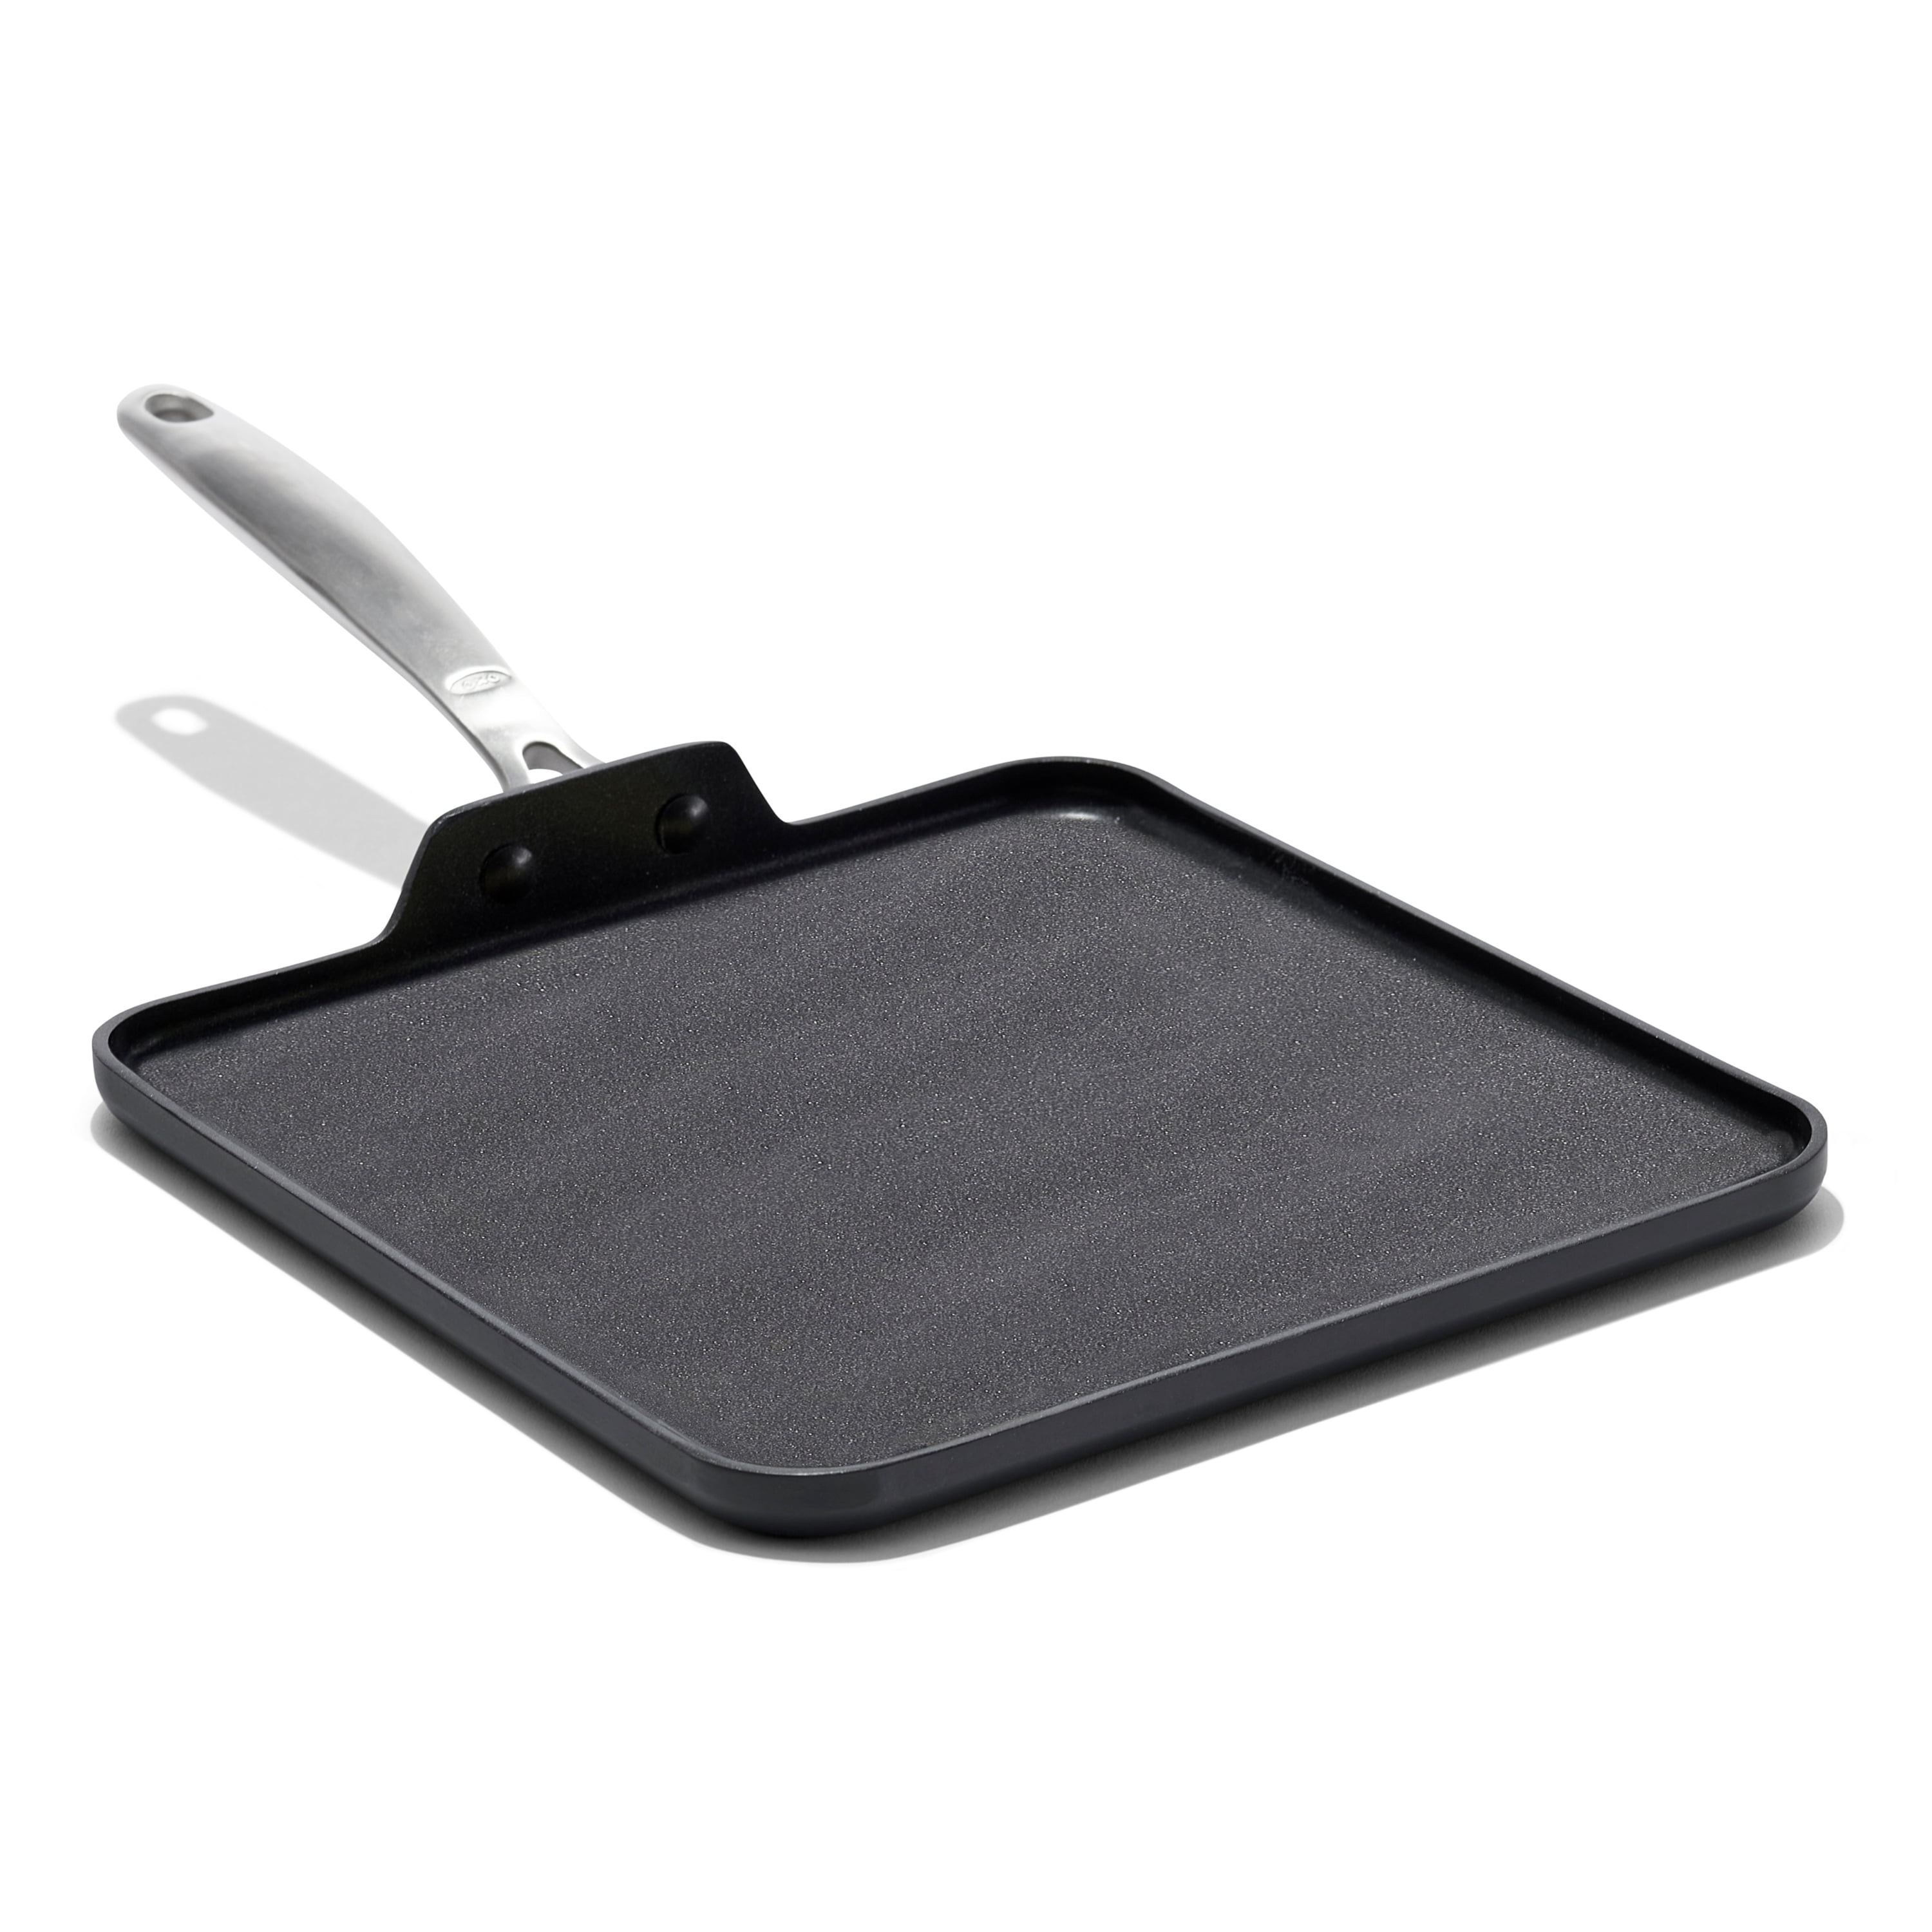 OXO Good Grips Pro Non-stick 11″ Griddle 